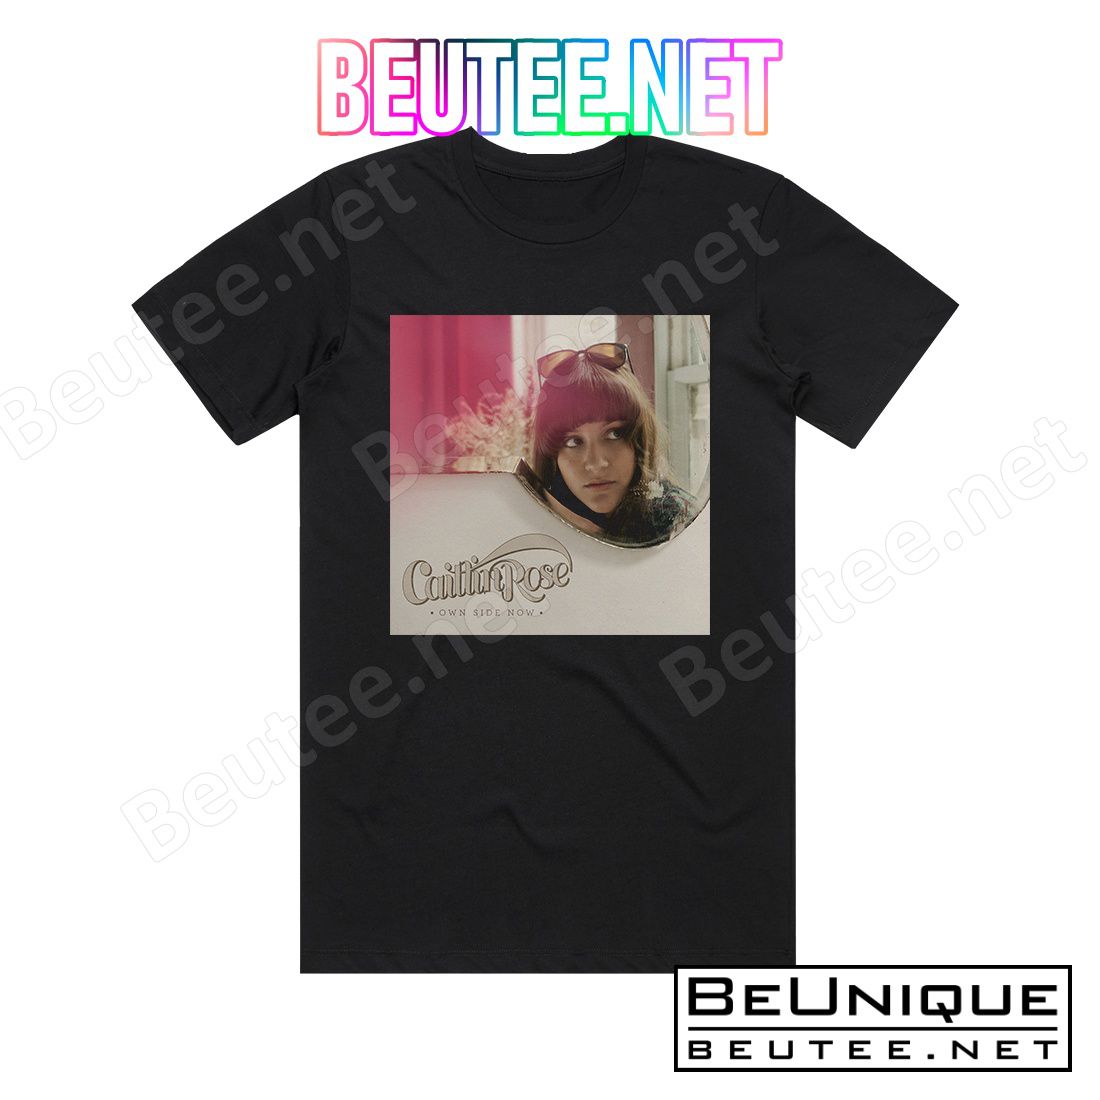 Caitlin Rose Own Side Now Album Cover T-Shirt